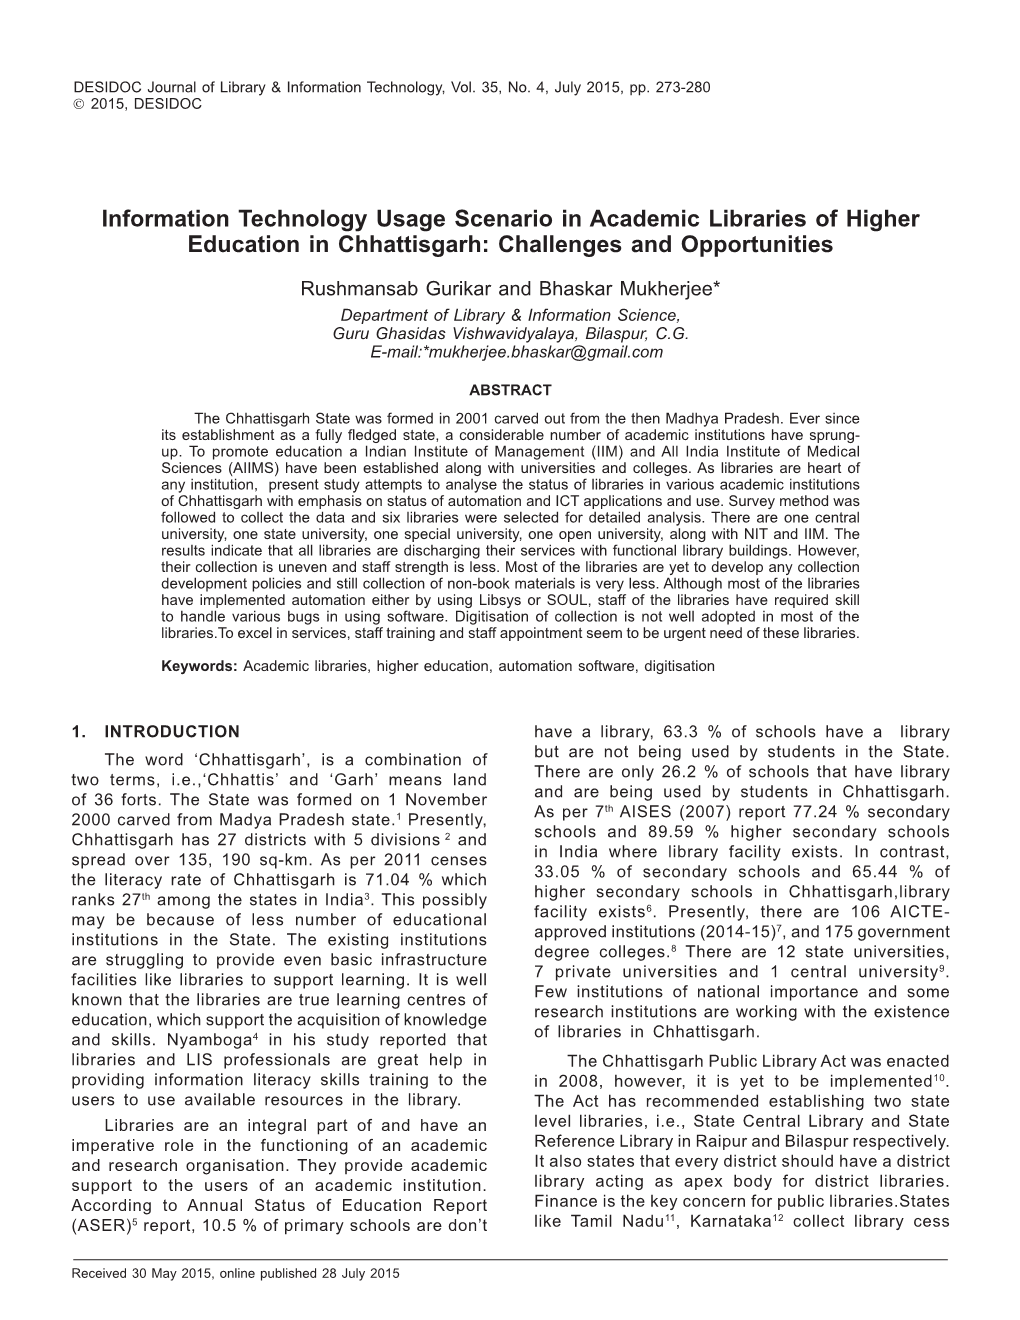 Information Technology Usage Scenario in Academic Libraries of Higher Education in Chhattisgarh: Challenges and Opportunities